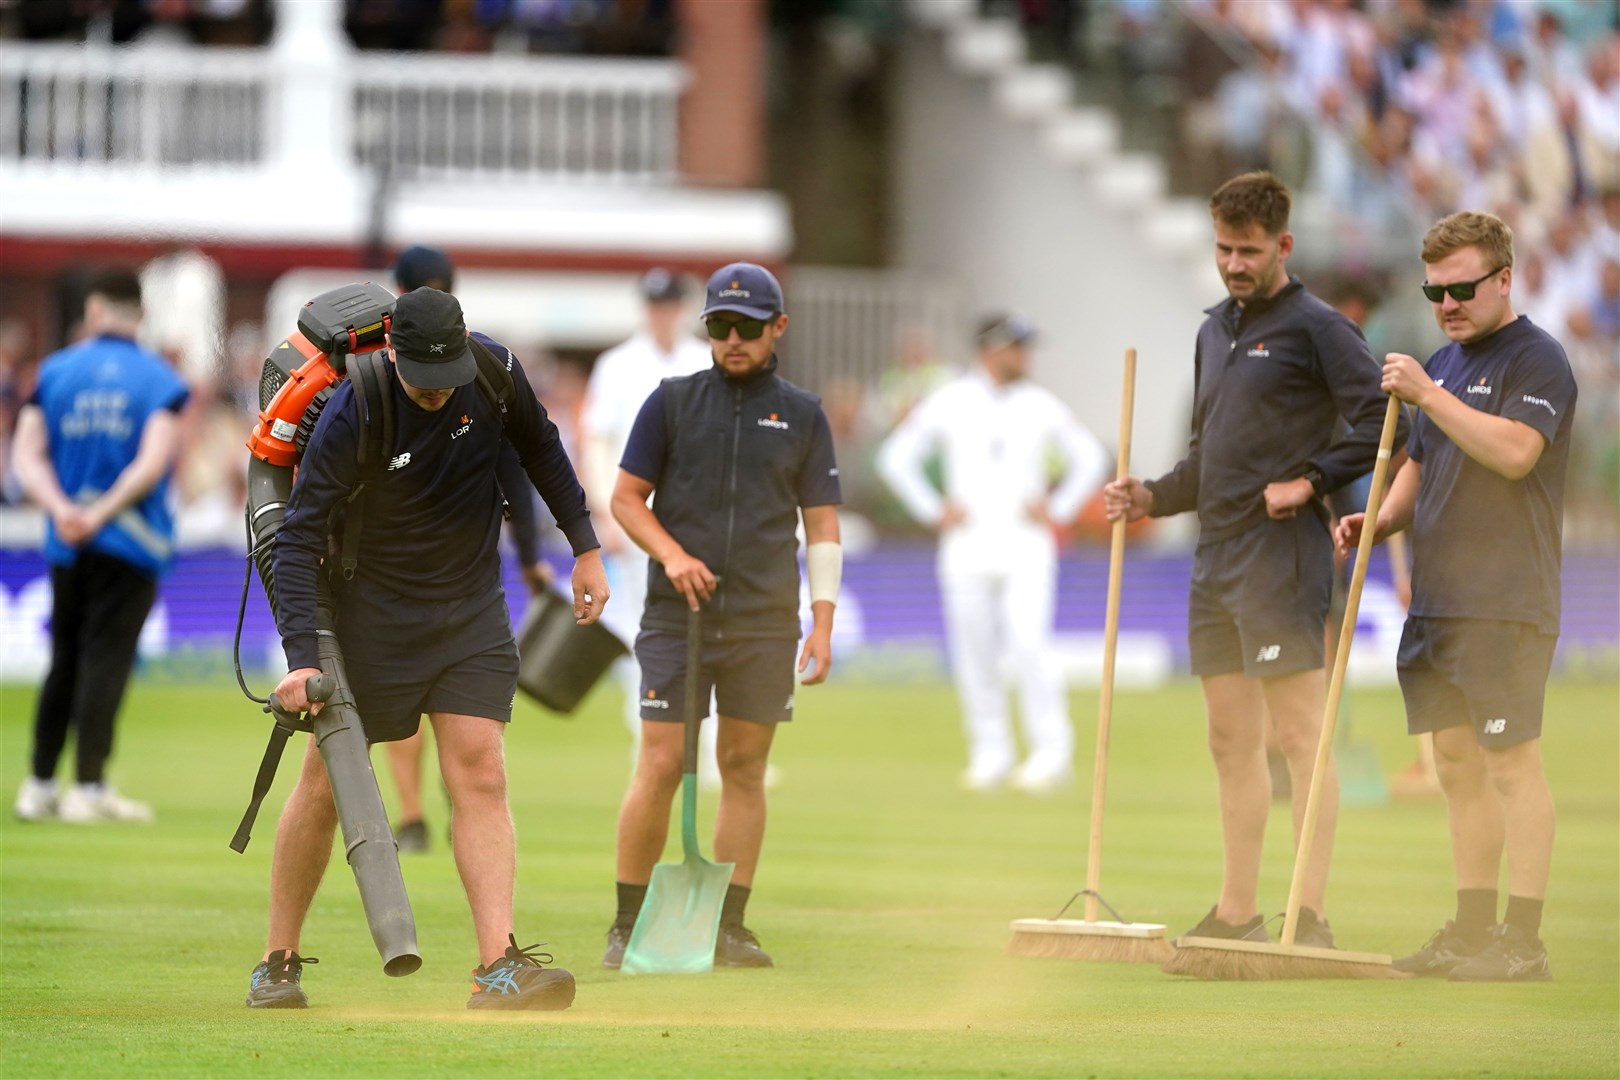 Ground staff cleaning up orange powder thrown by Just Stop Oil protesters during day one of the second Ashes Test match at Lord’s (PA)